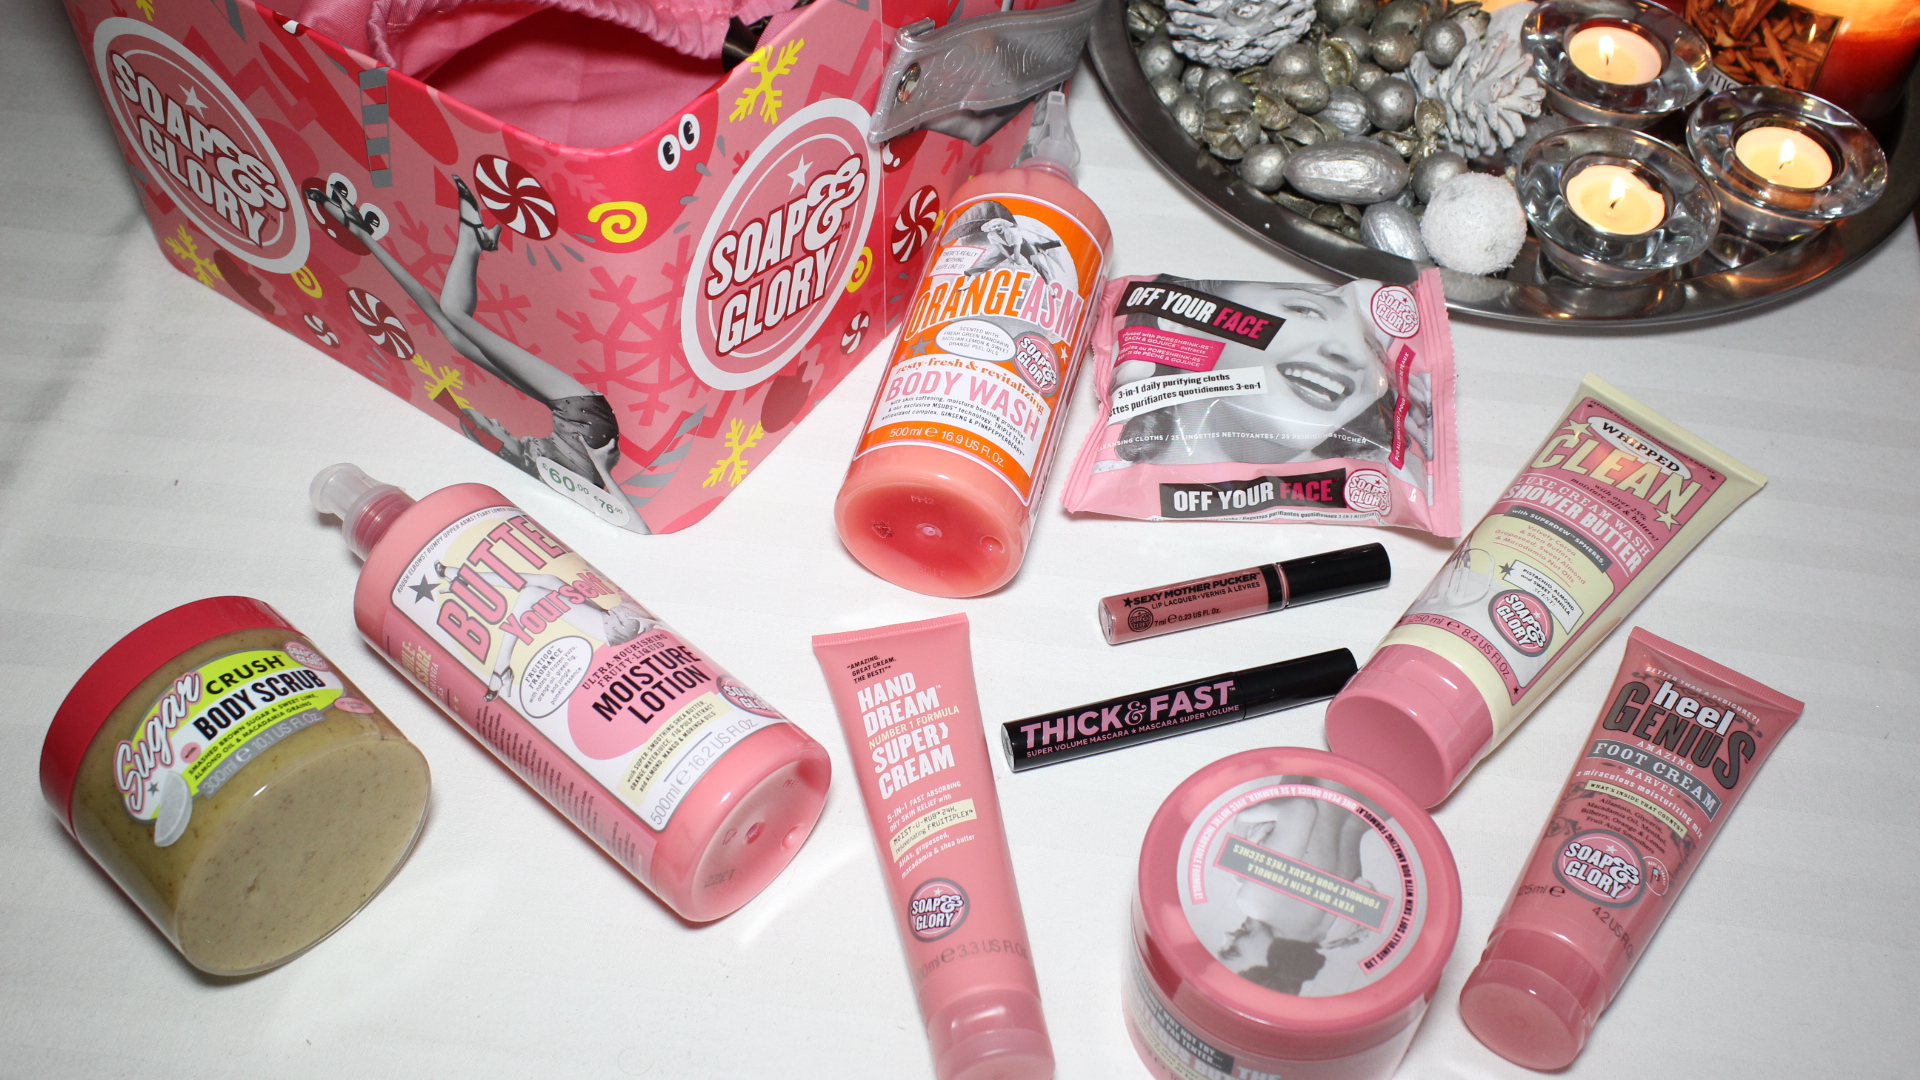 soap and glory the next big thing